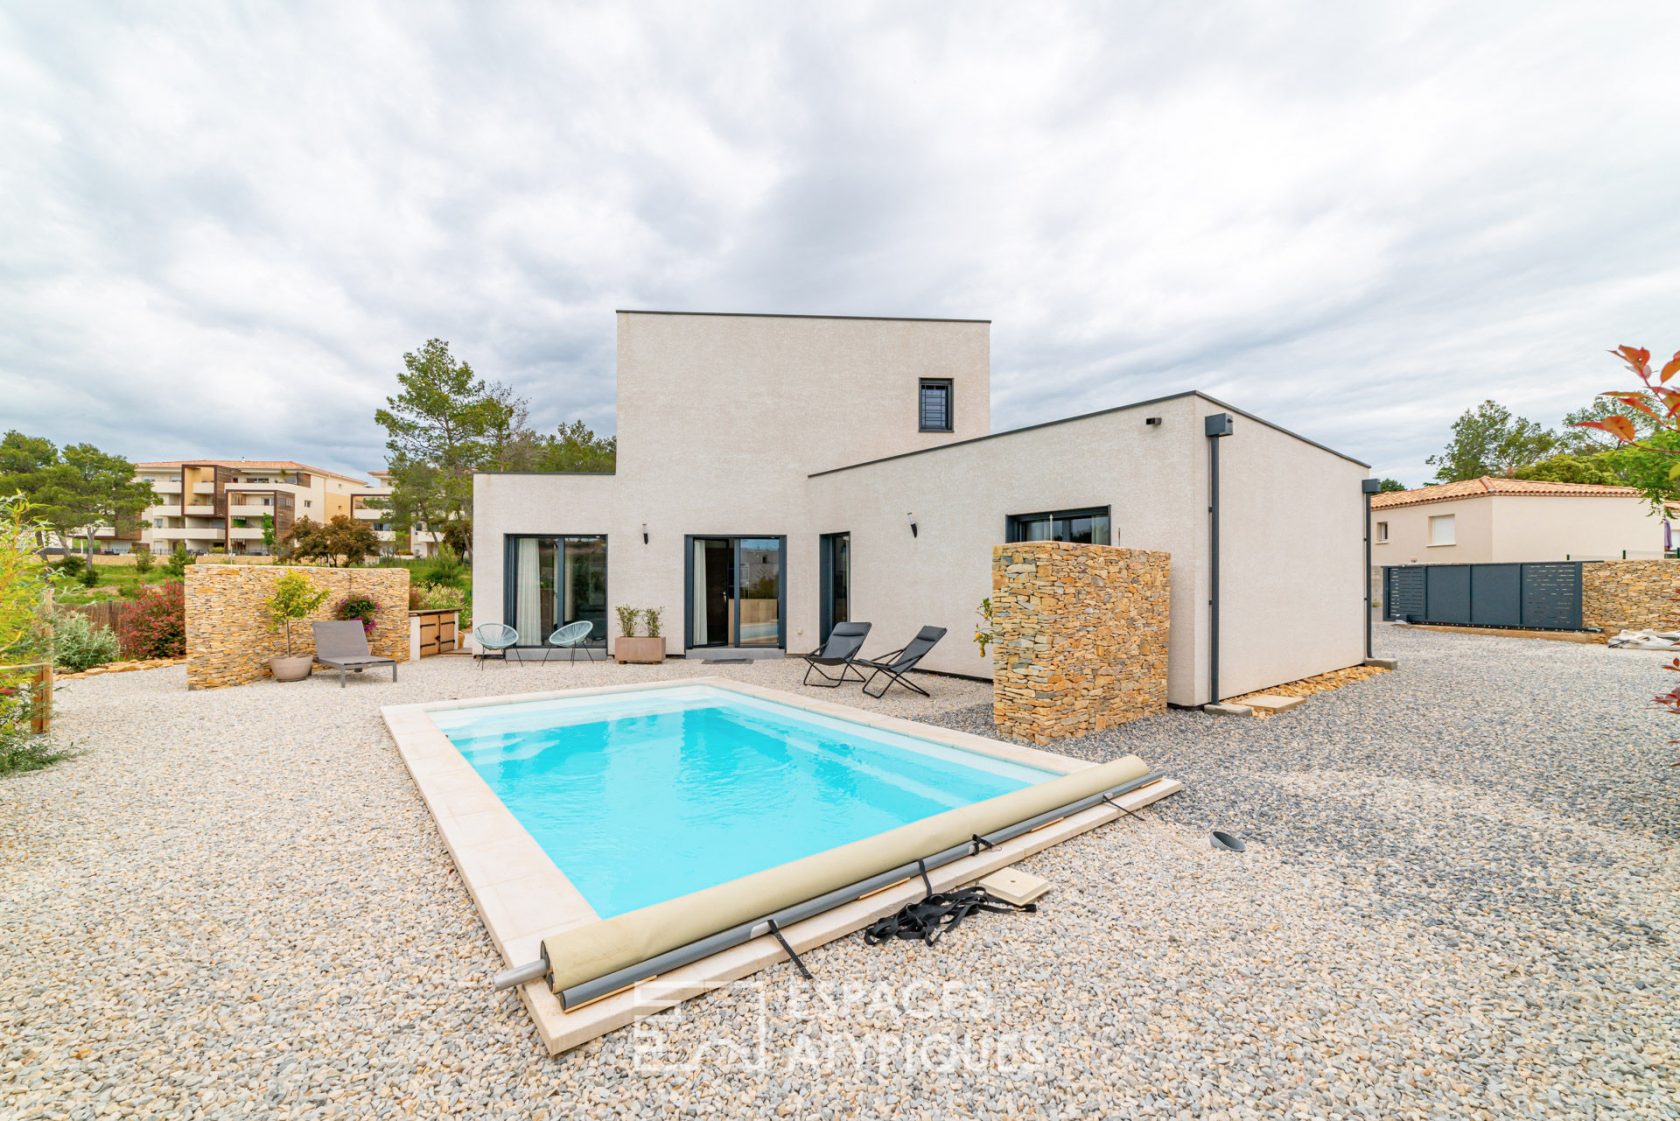 Villa with swimming pool in residential area of Nîmes Ouest